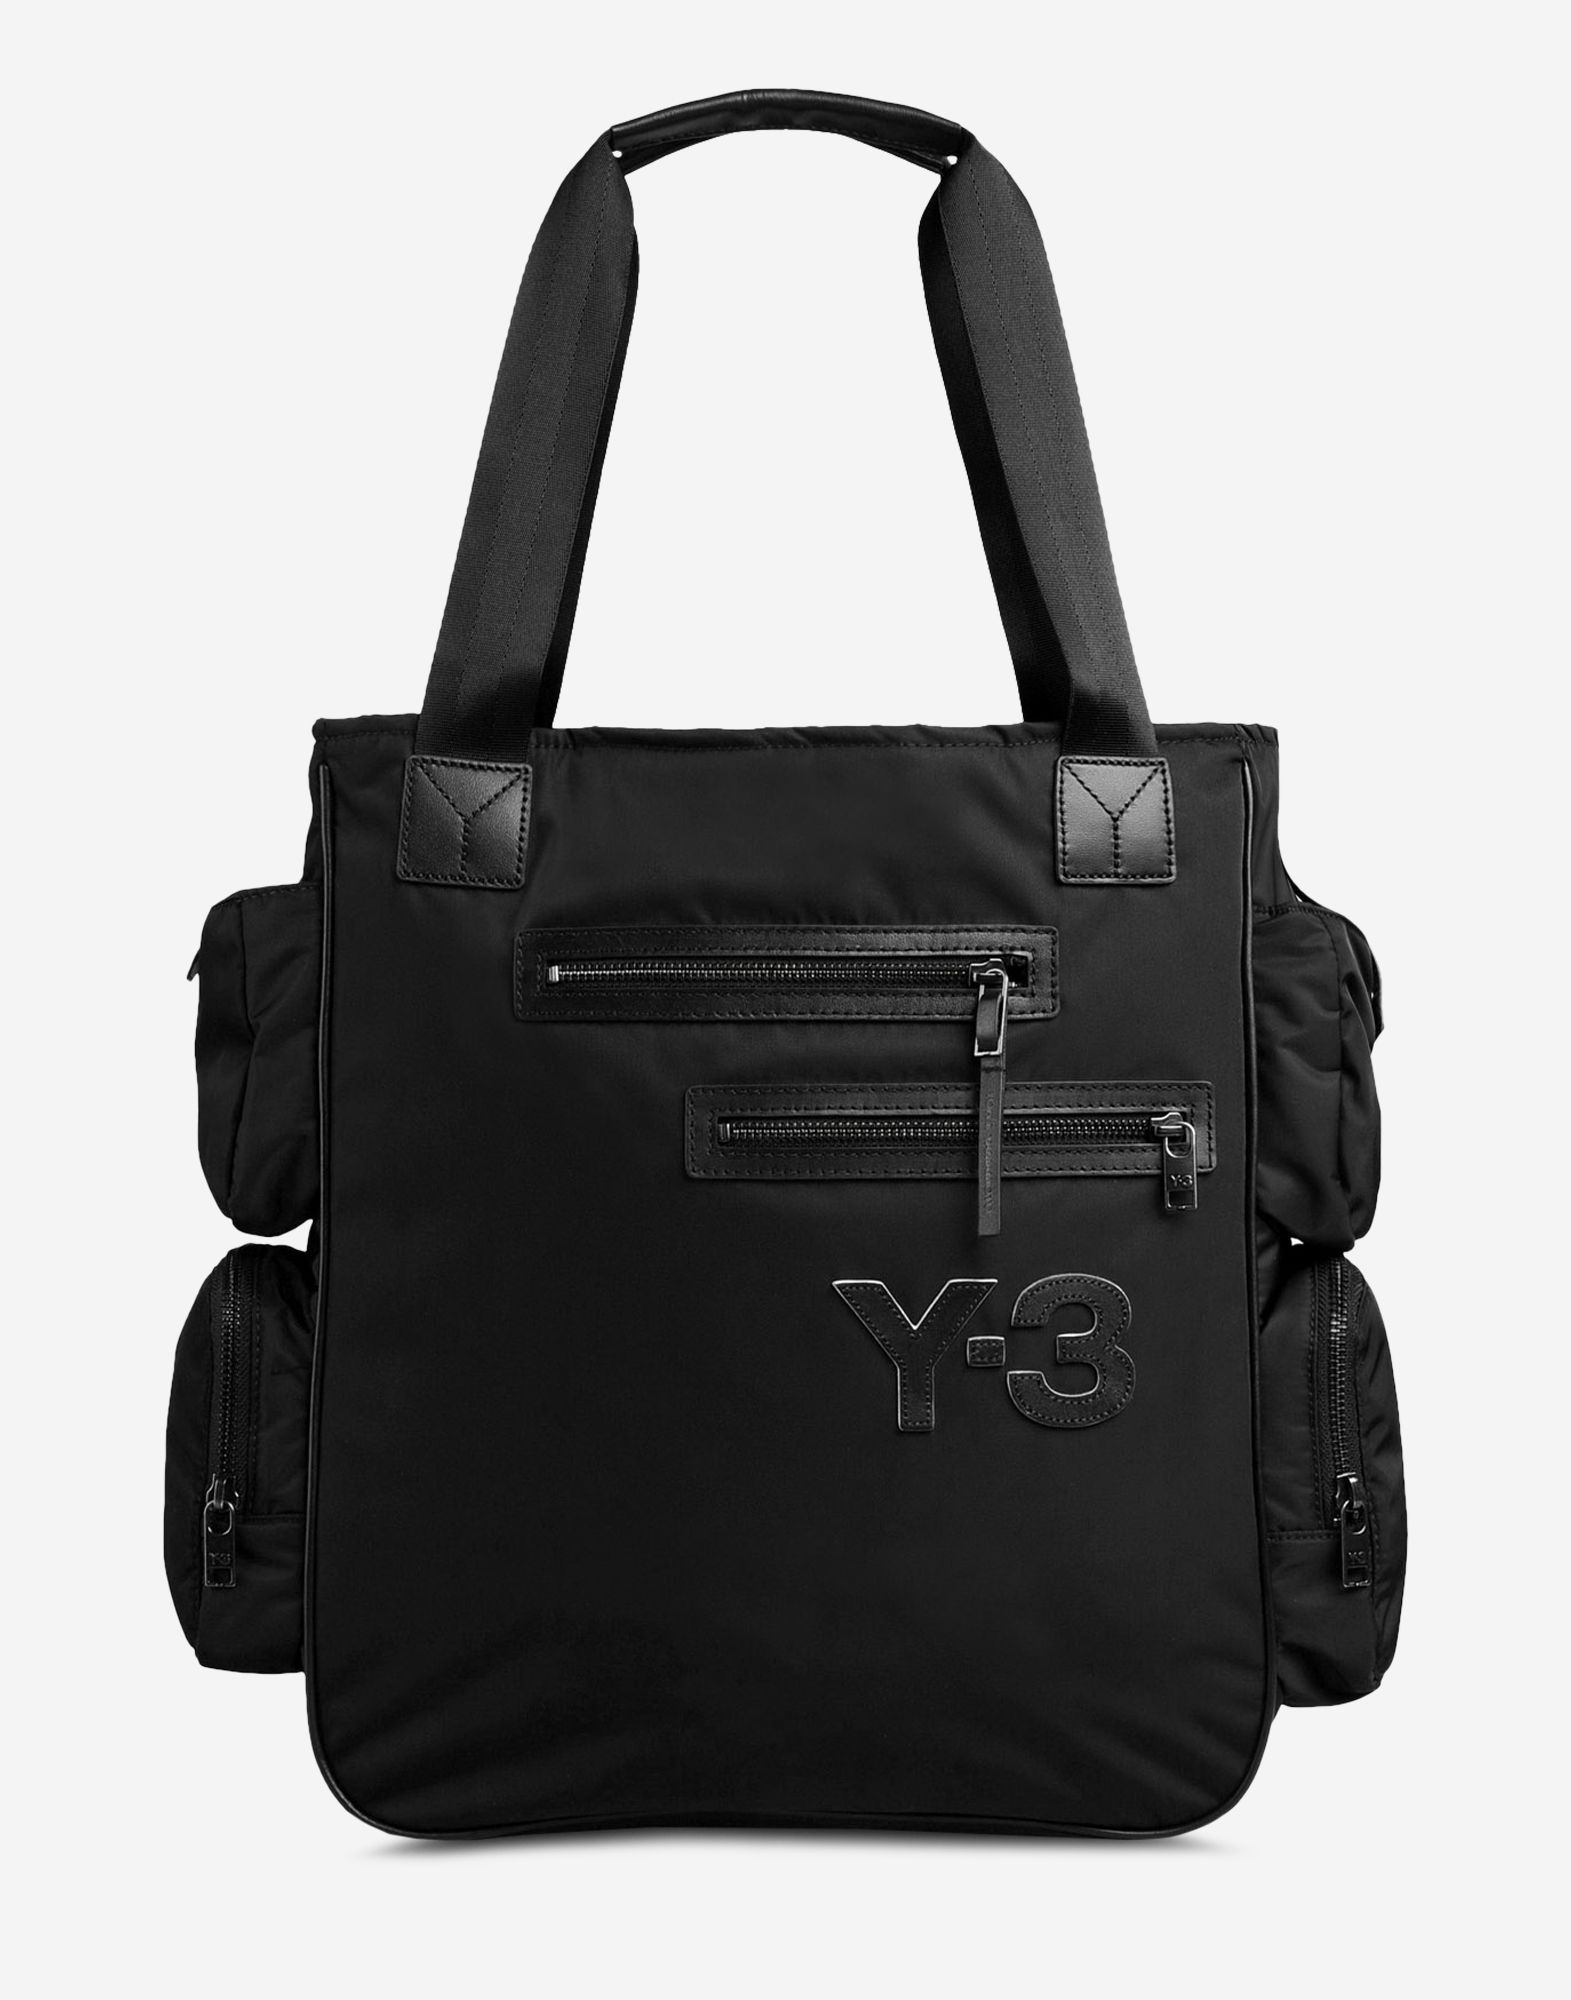 adidas bags new collection